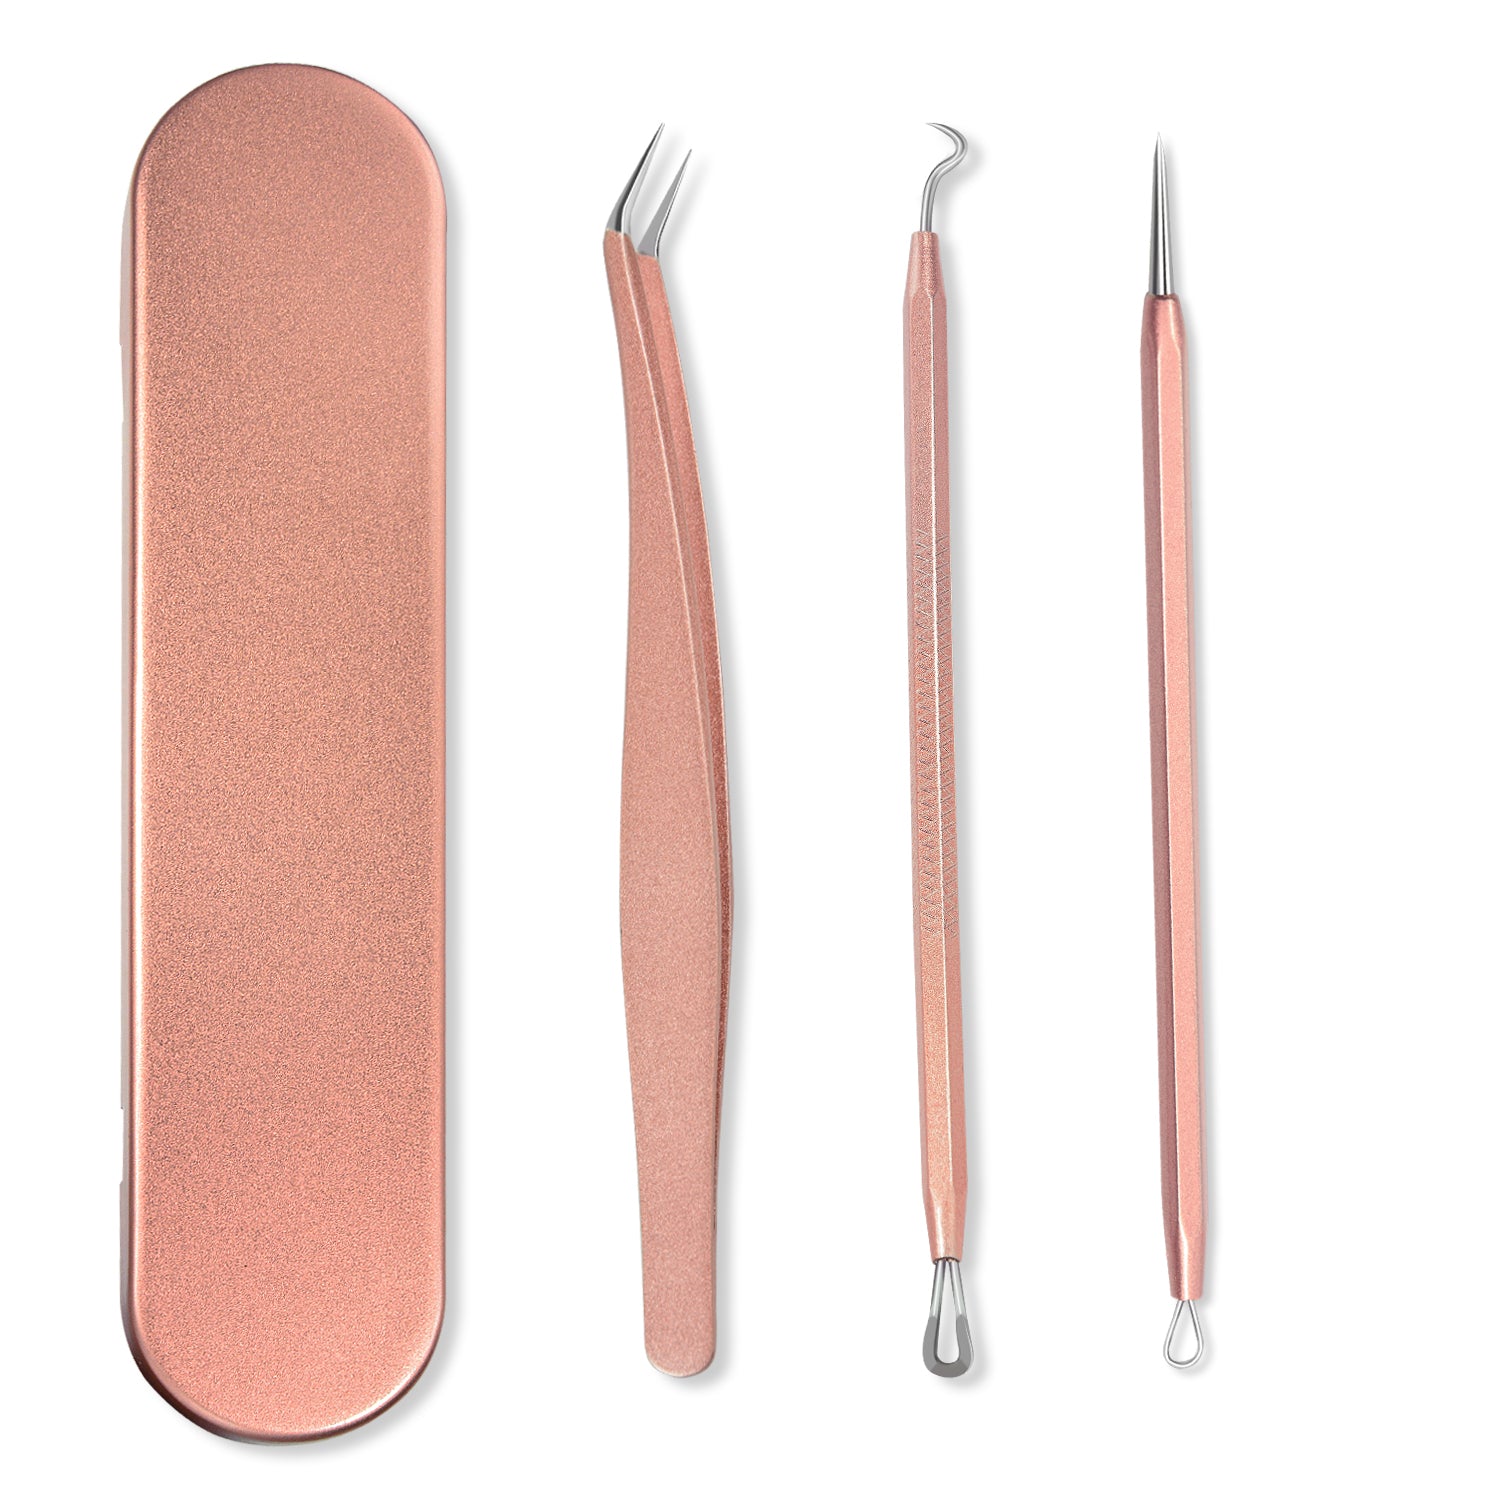  Therwen 7 Pcs Weeding Tools Set for Vinyl with LED Light Pin  and Hook Retractable Rose Gold Pen and Tweezers for Removing Tiny Vinyl  Paper and Iron on Projects Cuts for